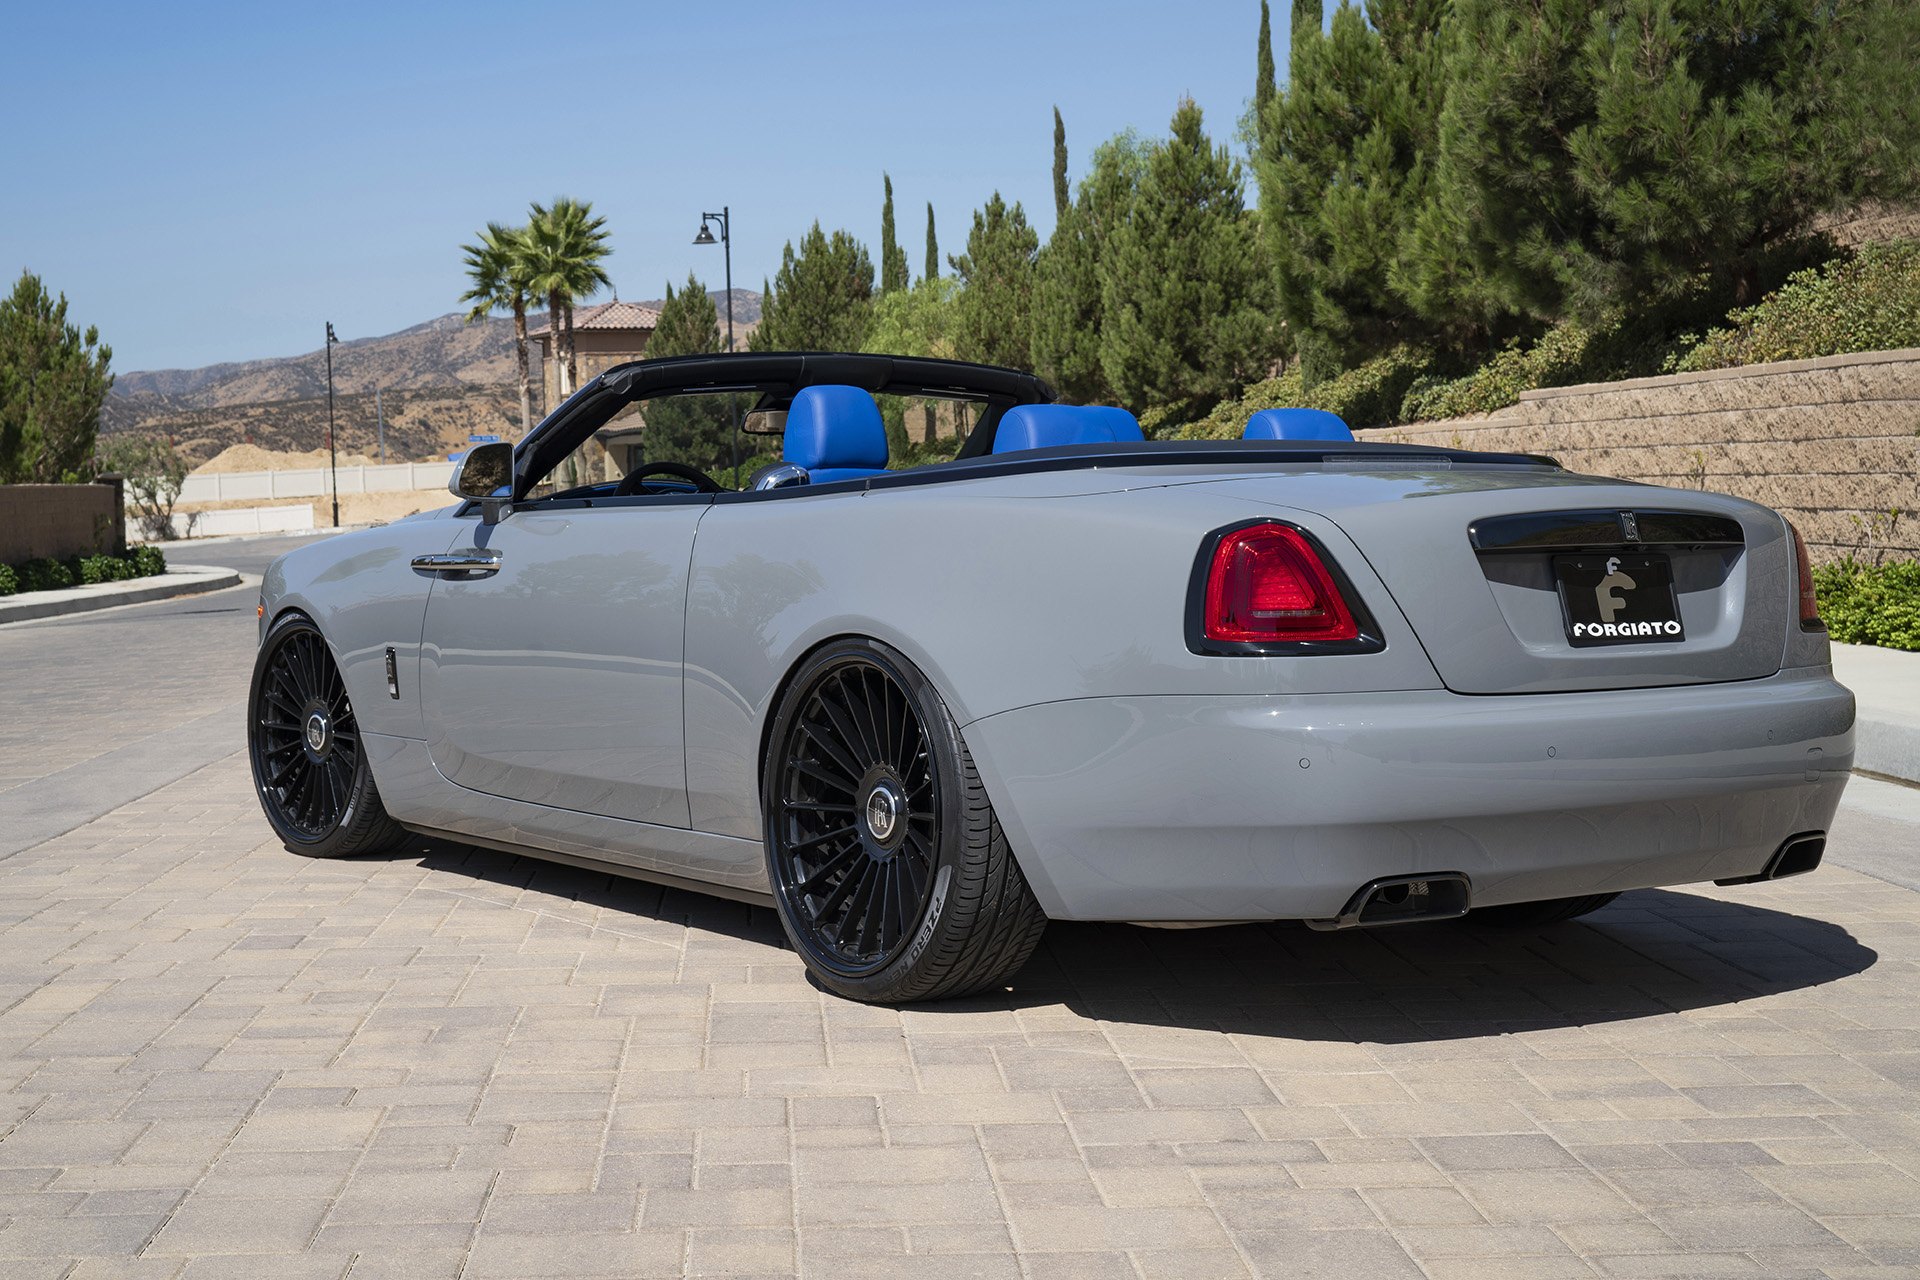 Gray Convertible Rolls Royce Dawn with Red LED Taillights - Photo by Forgiato